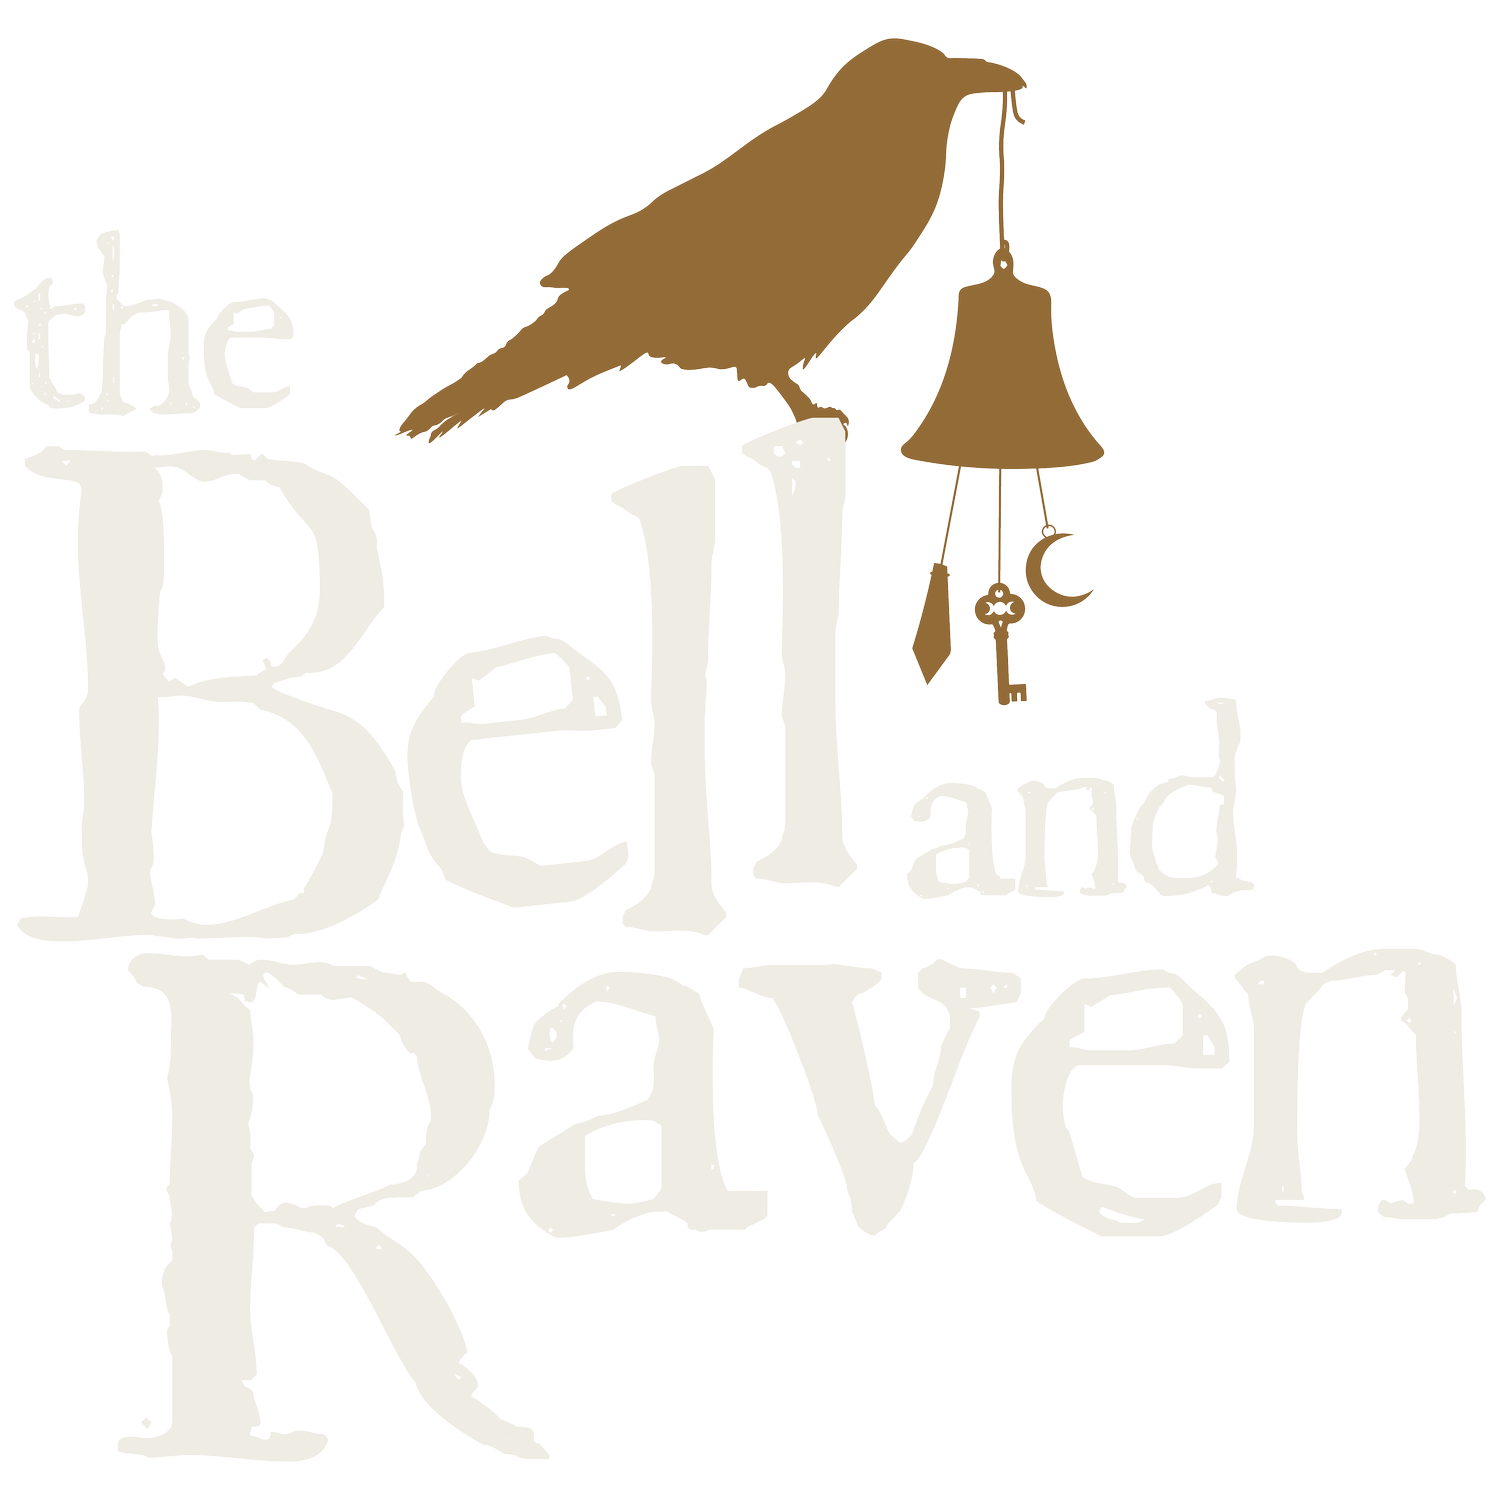 The Bell and Raven